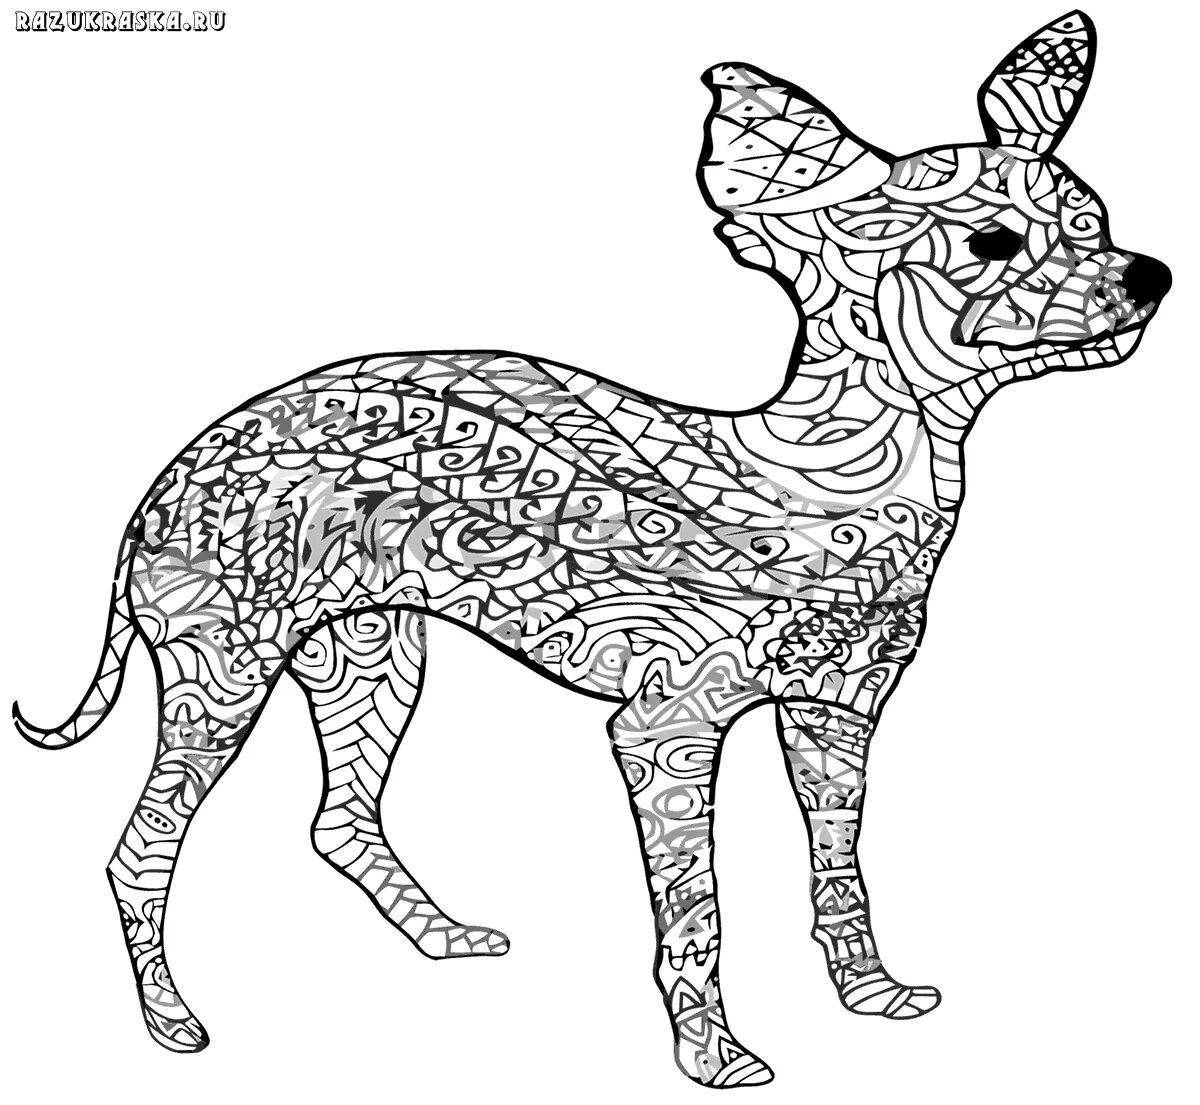 Coloring book funny patterned dog